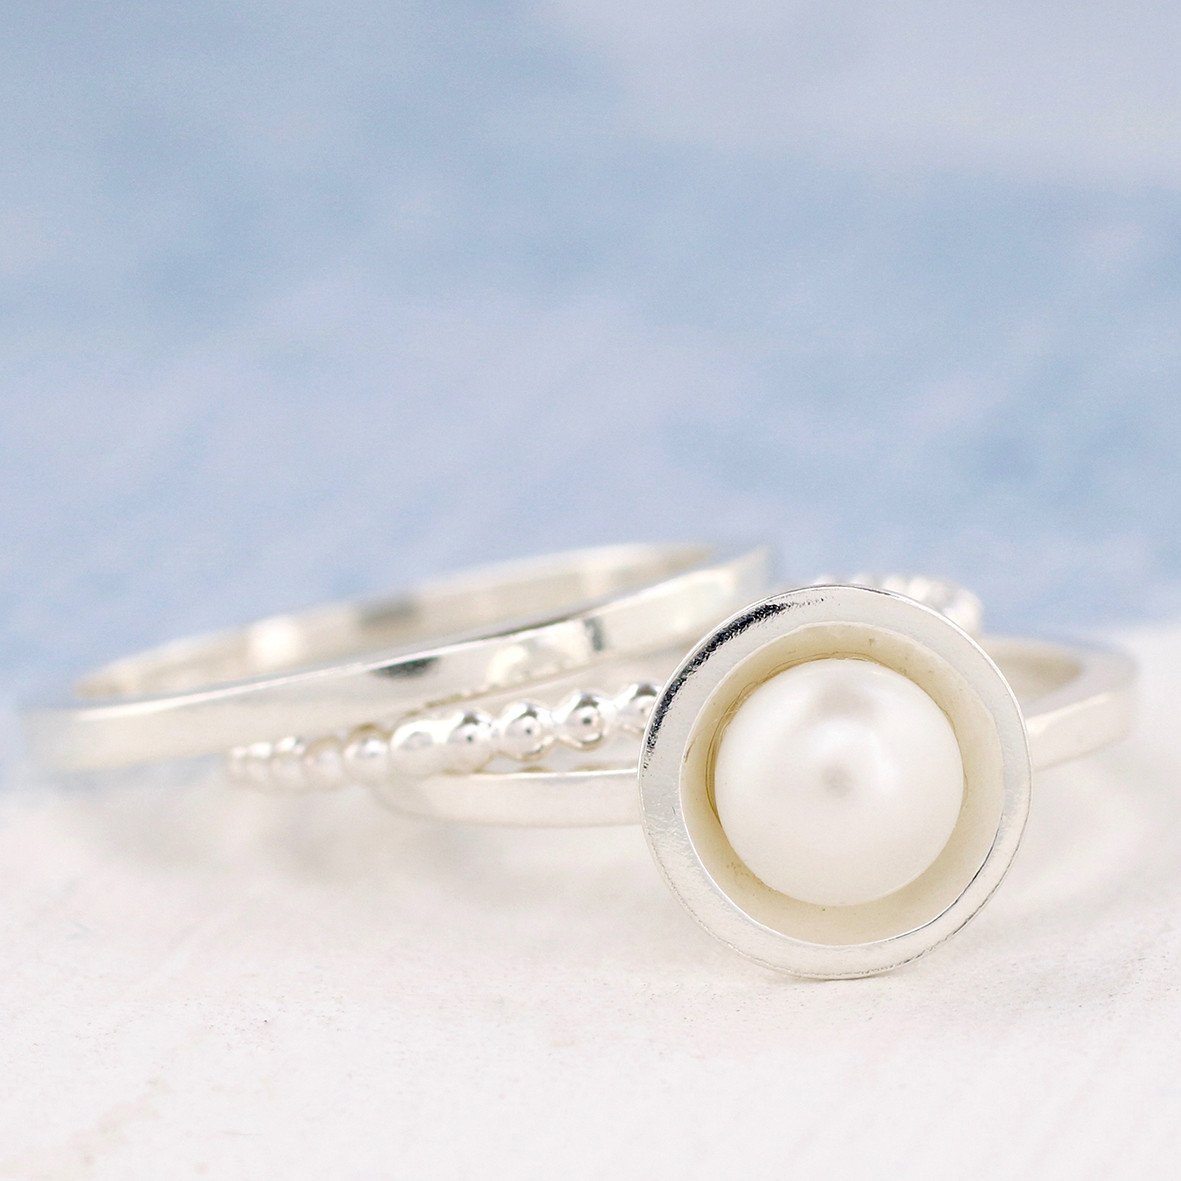 silver Pearl stackable rings